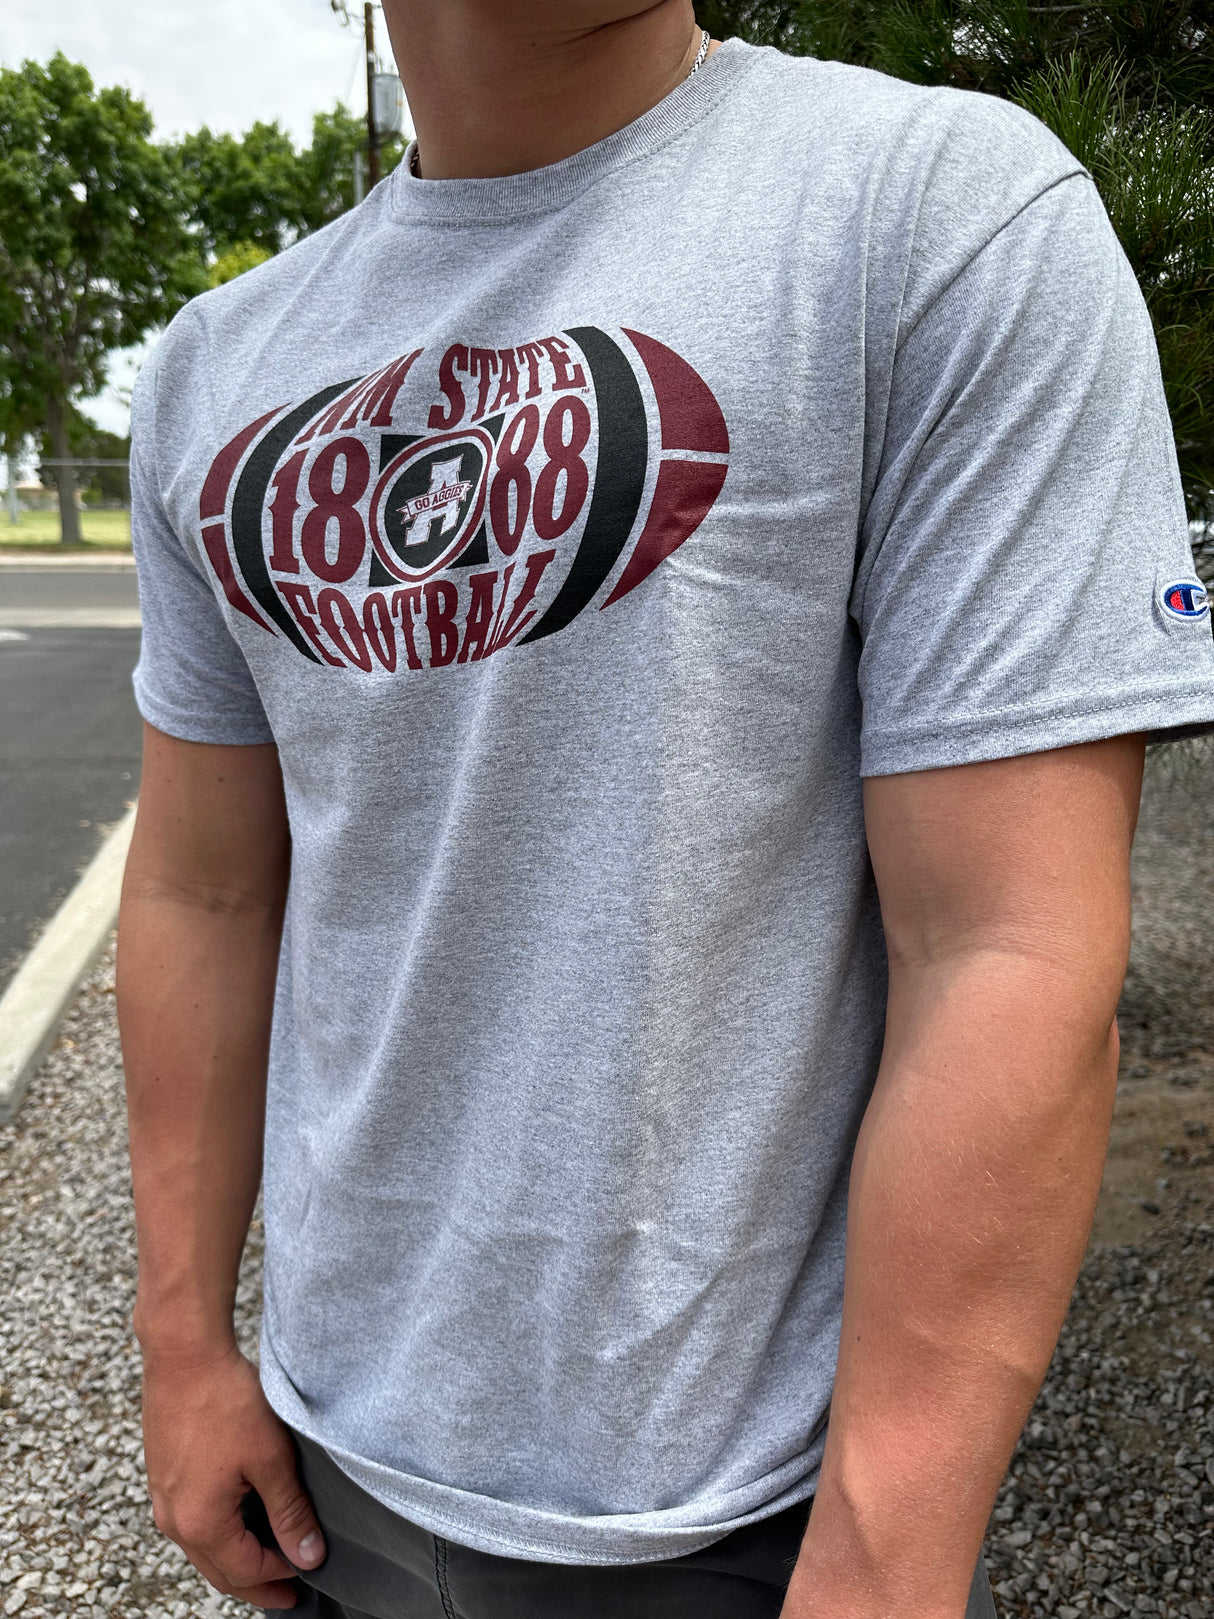 NM State Football Since 88 SS Tee